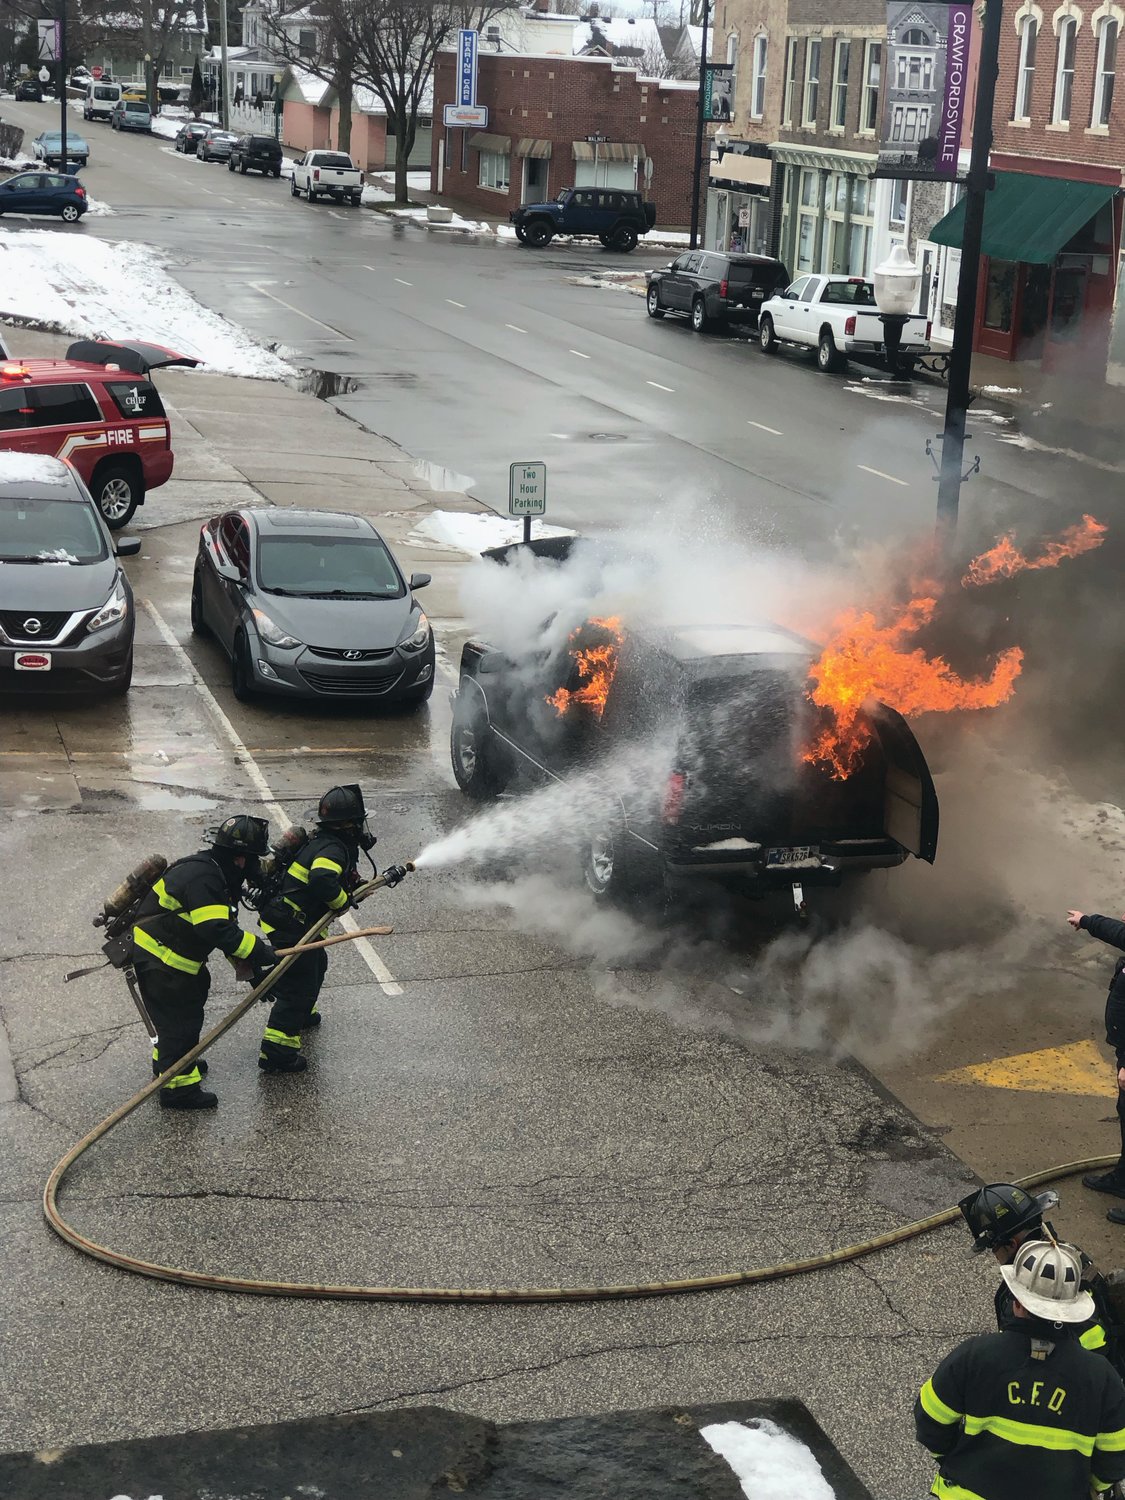 Members of the Crawfordsville Fire Department extinguish a car fire at 3 p.m. Friday behind the Fusion 54 building in the 100 block of West Main Street. No injuries were reported and no other property was damaged.